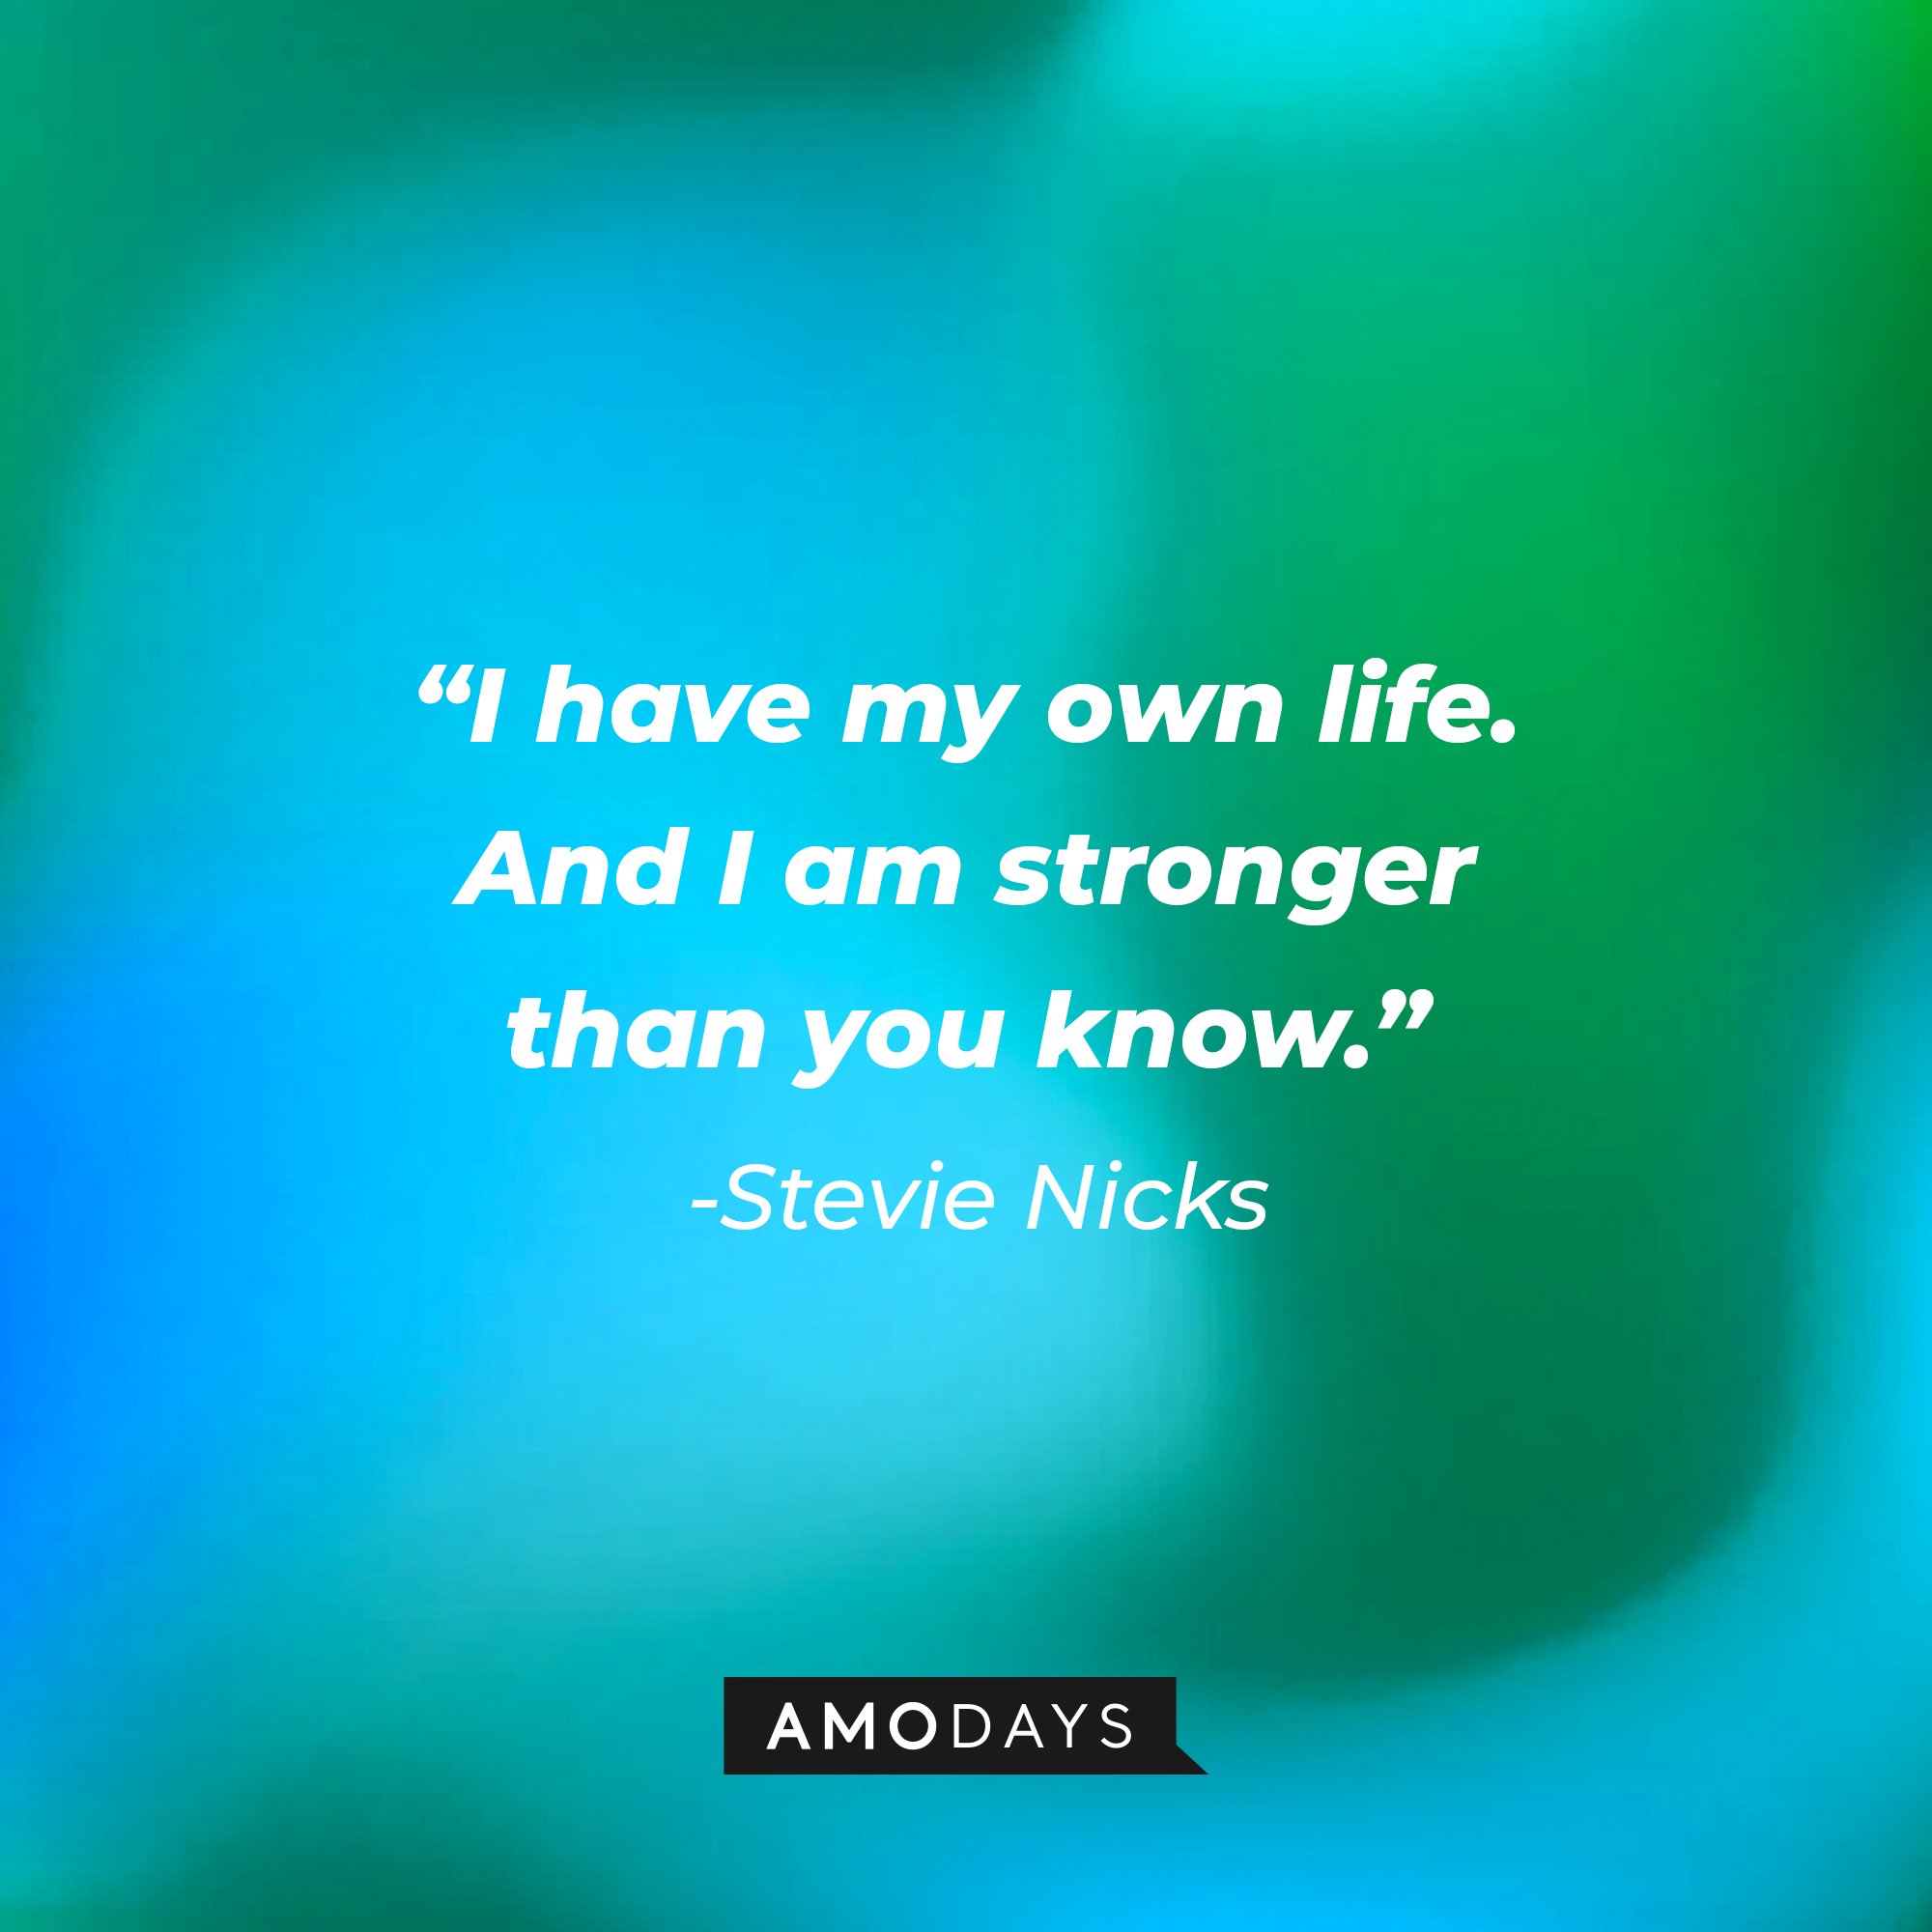 Stevie Nicks's quote: "I have my own life. And I am stronger than you know." | Image: AmoDays